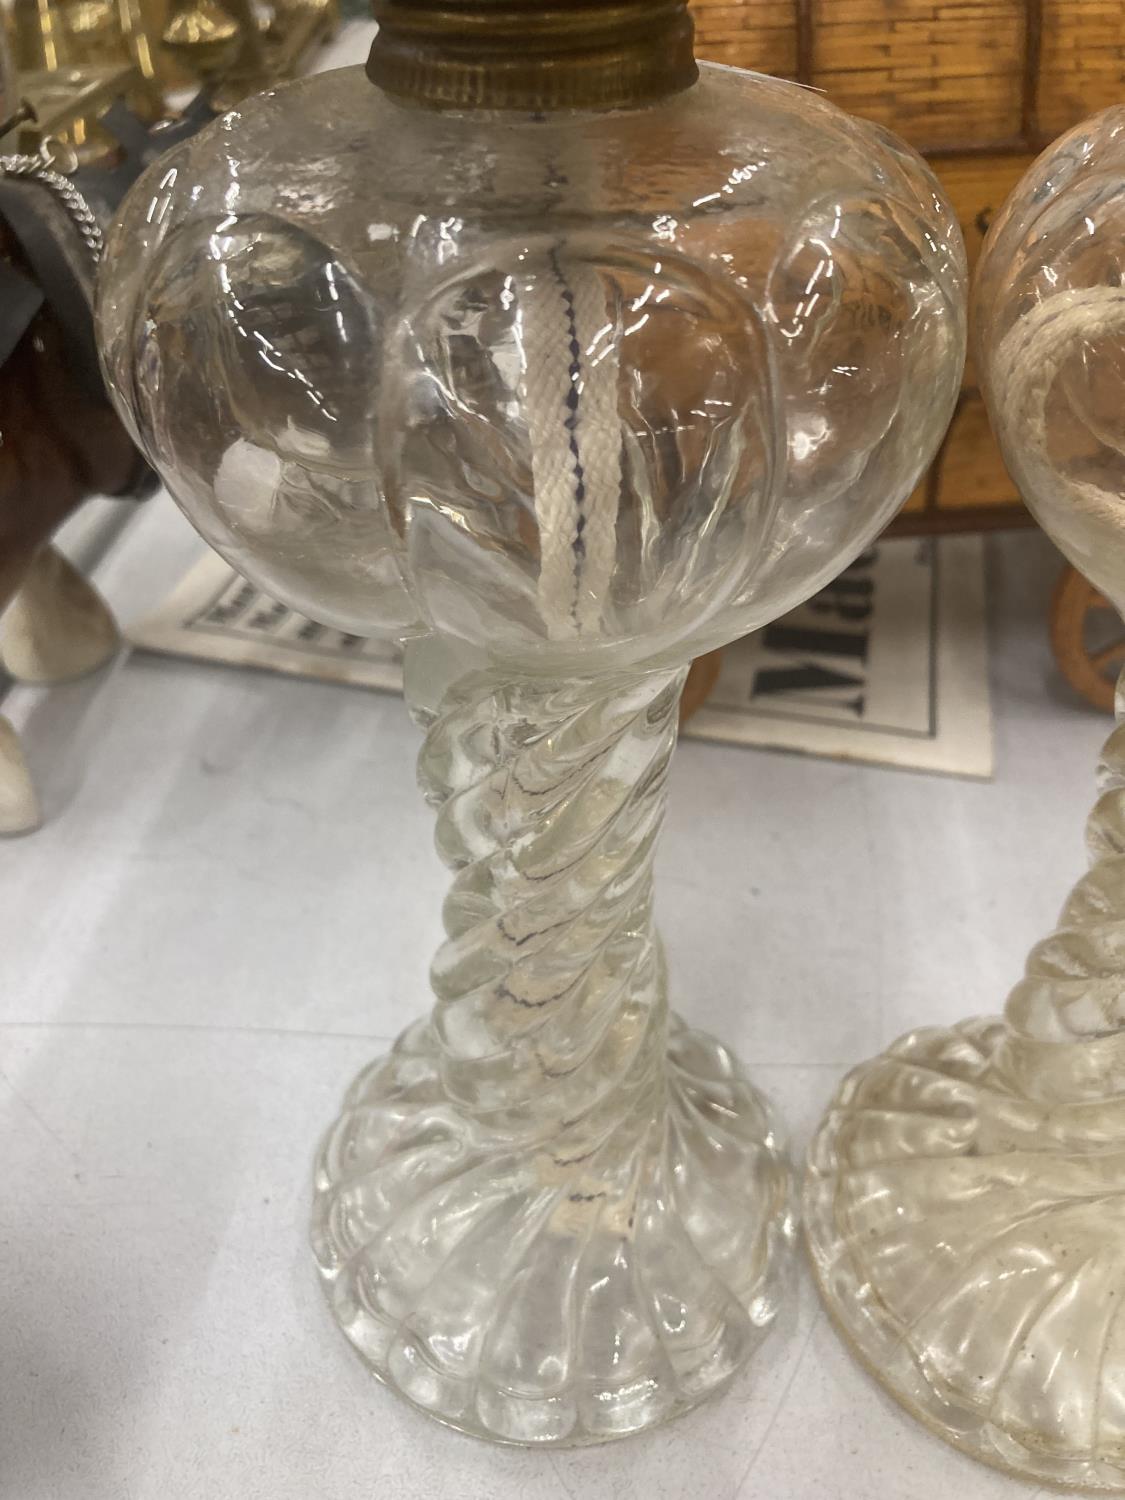 A PAIR OF VINTAGE GLASS OIL LAMPS WITH BARLEY TWIST STEM - Image 3 of 3